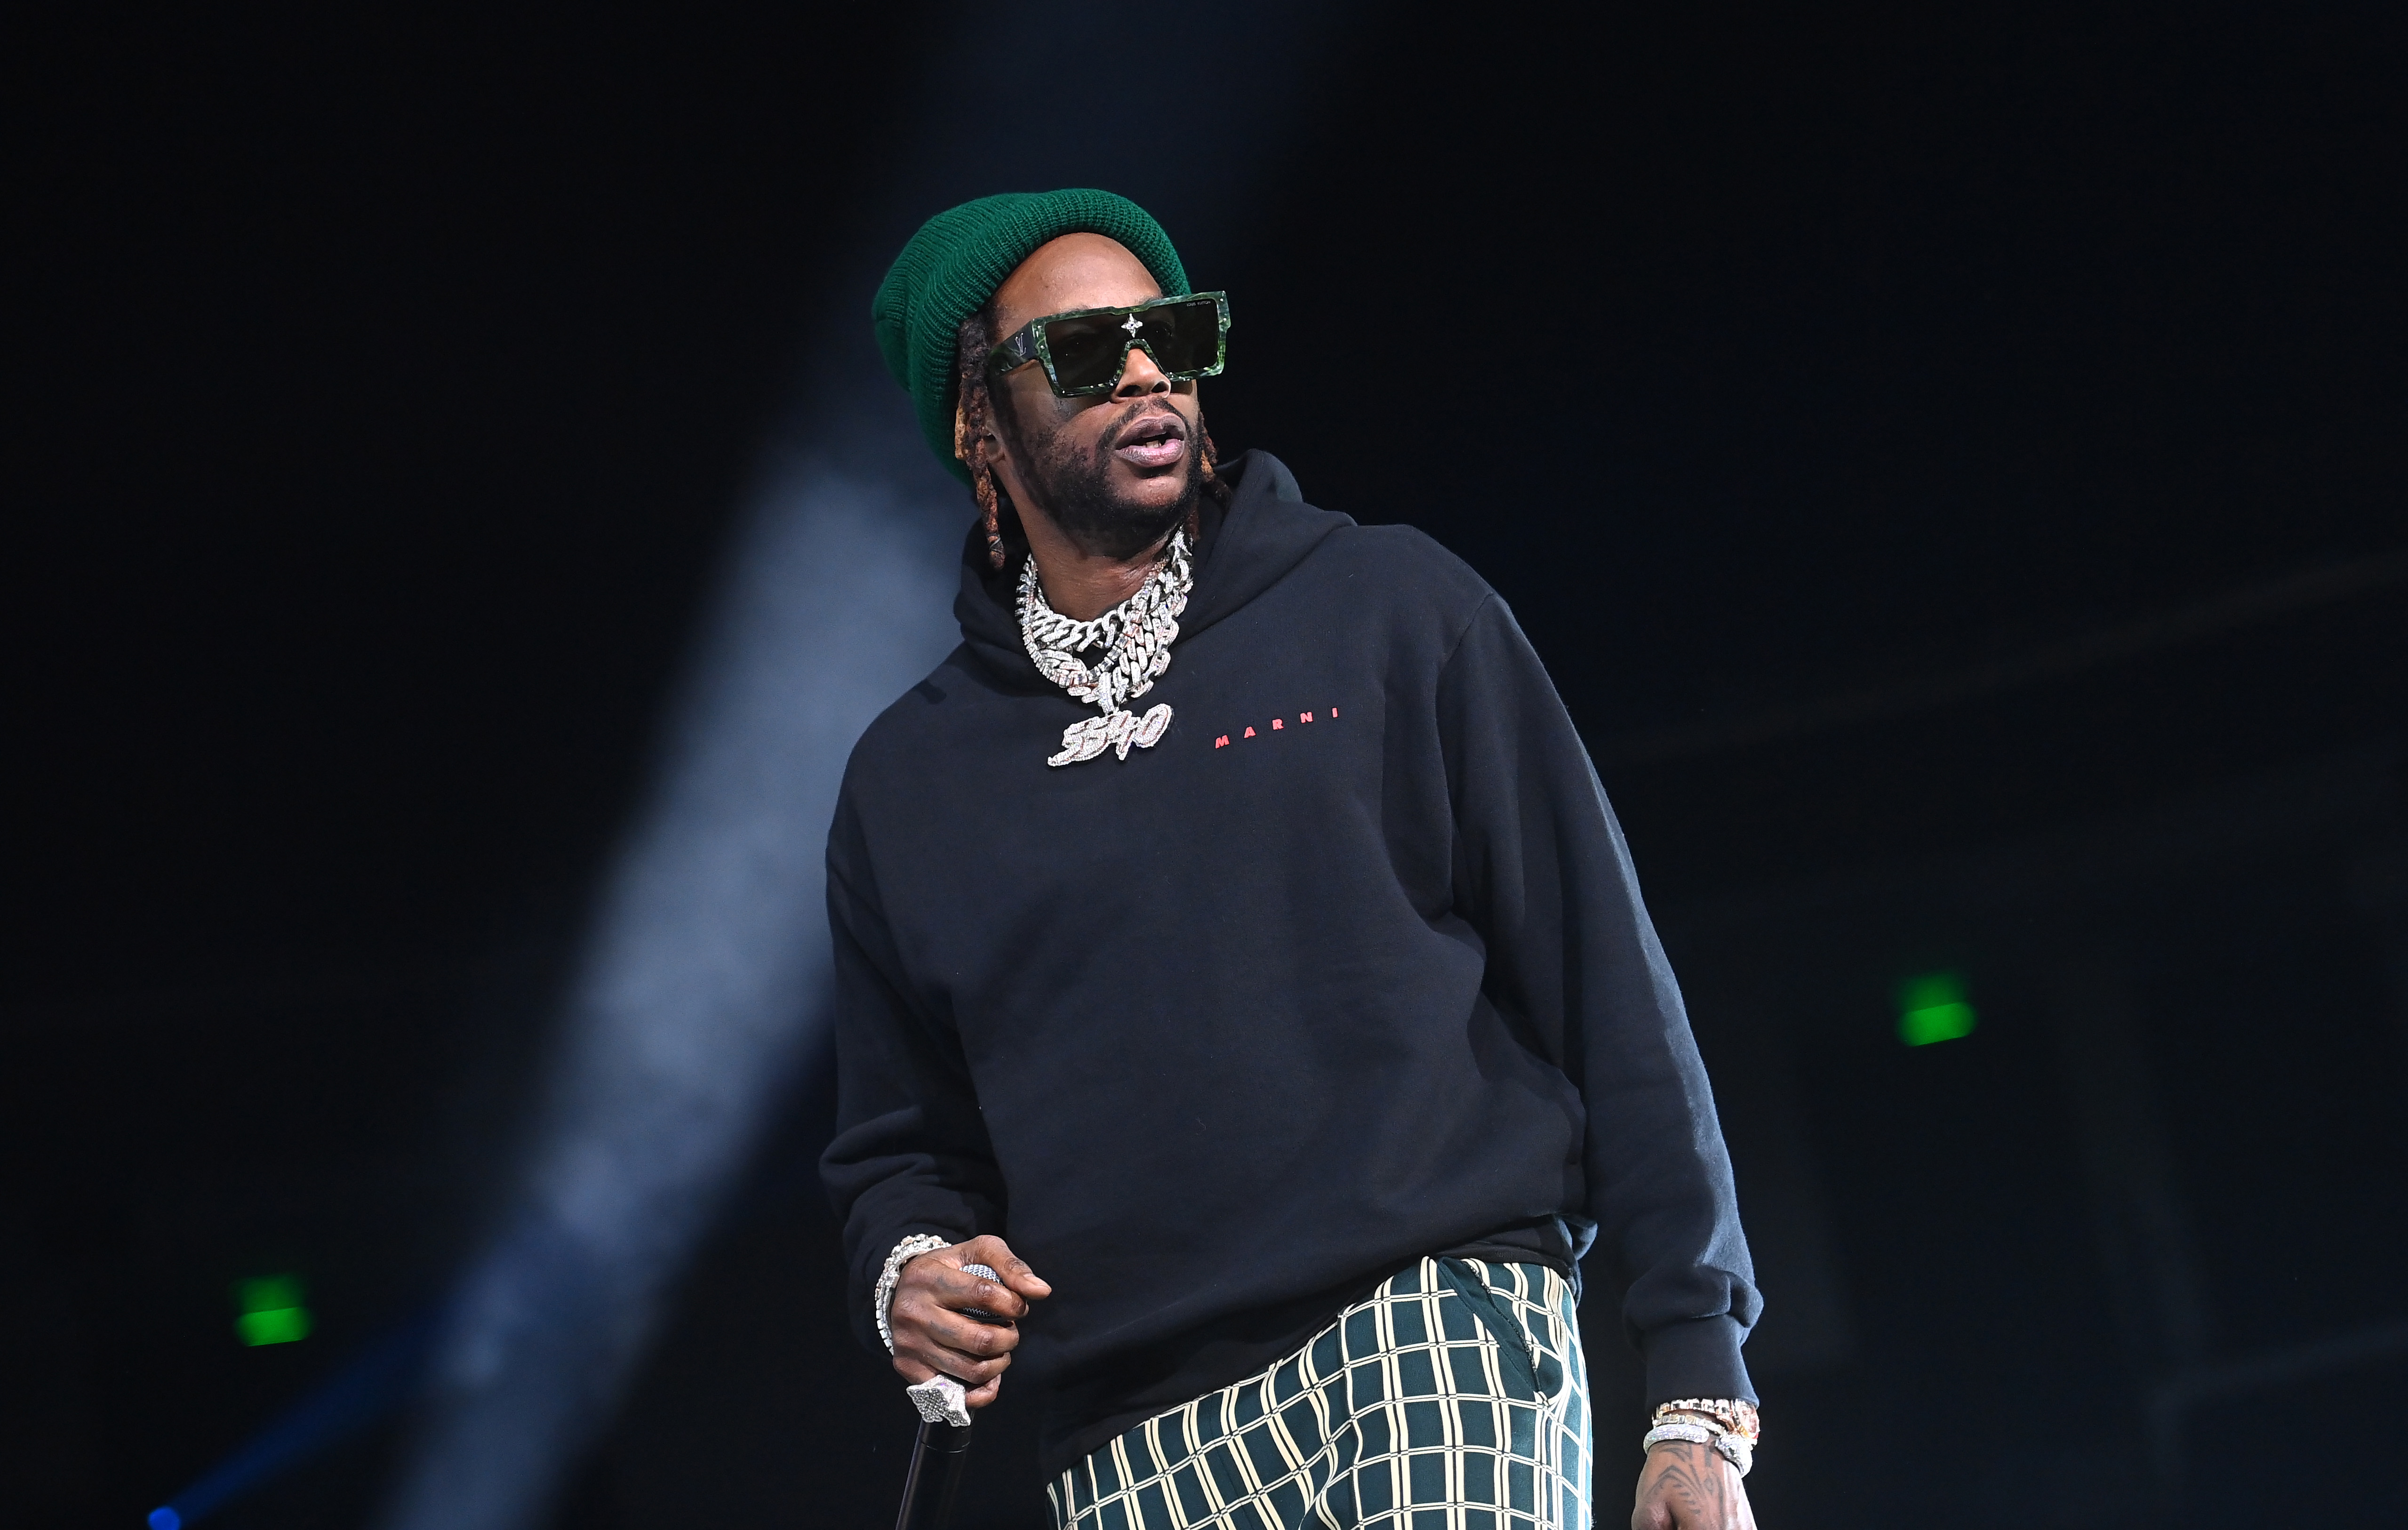 2 Chainz performs onstage during “Legendz Of The Streetz” tour at BJCC on February 05, 2022 in Birmingham, Alabama.